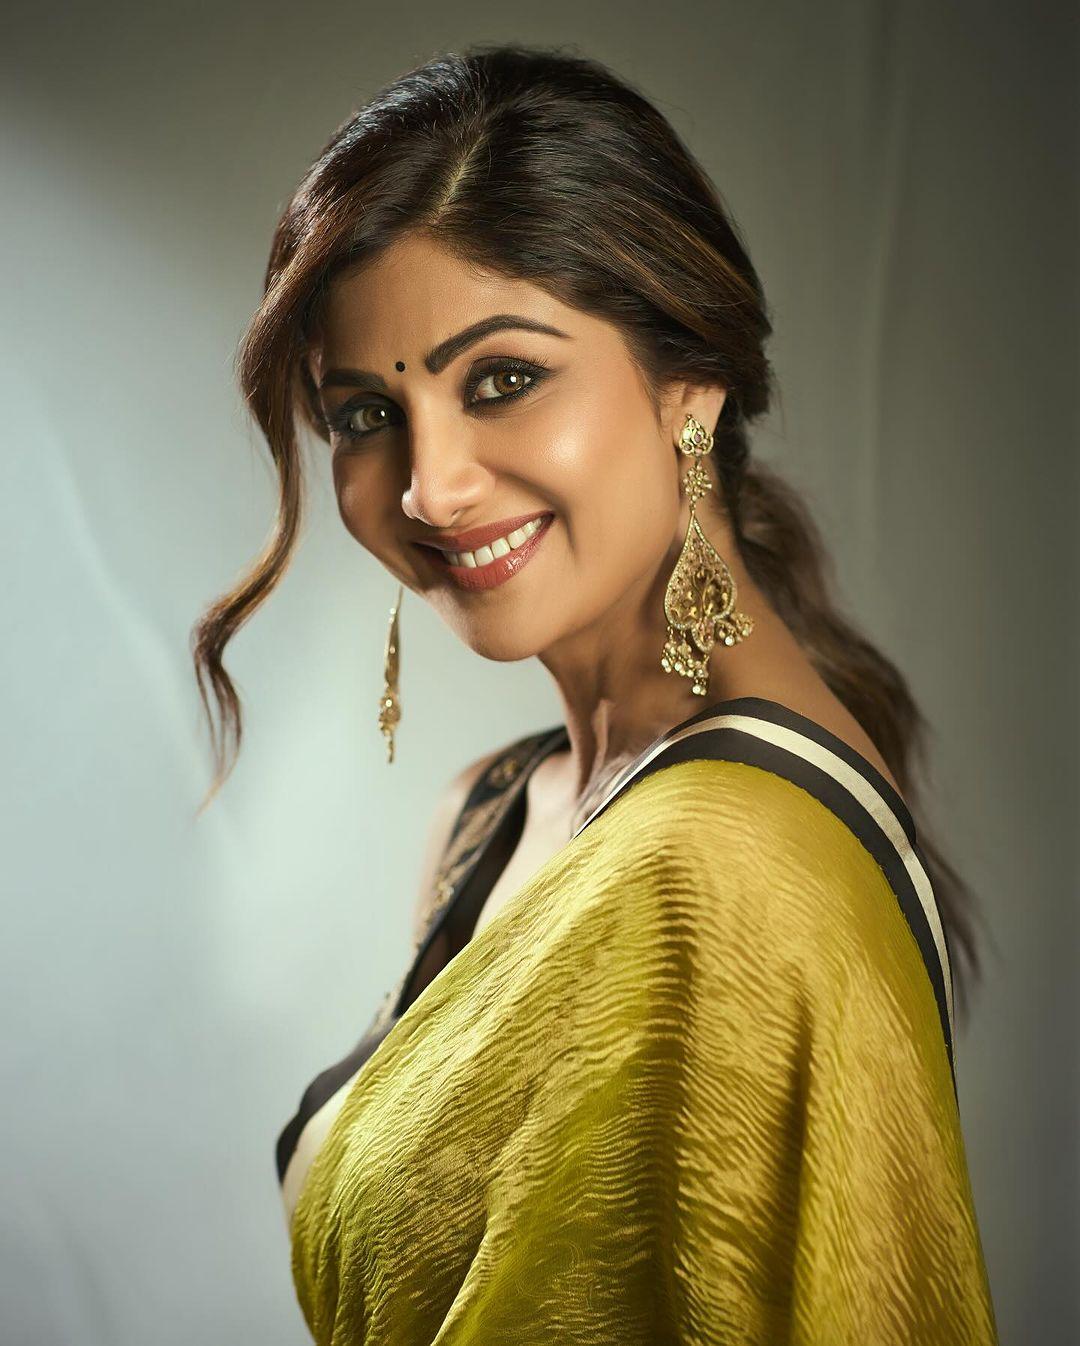 The saree features a lively mustard green colour on the pallu, with a bold black and white striped print at the bottom. Shilpa pairs it effortlessly with a black sleeveless blouse adorned with golden floral prints